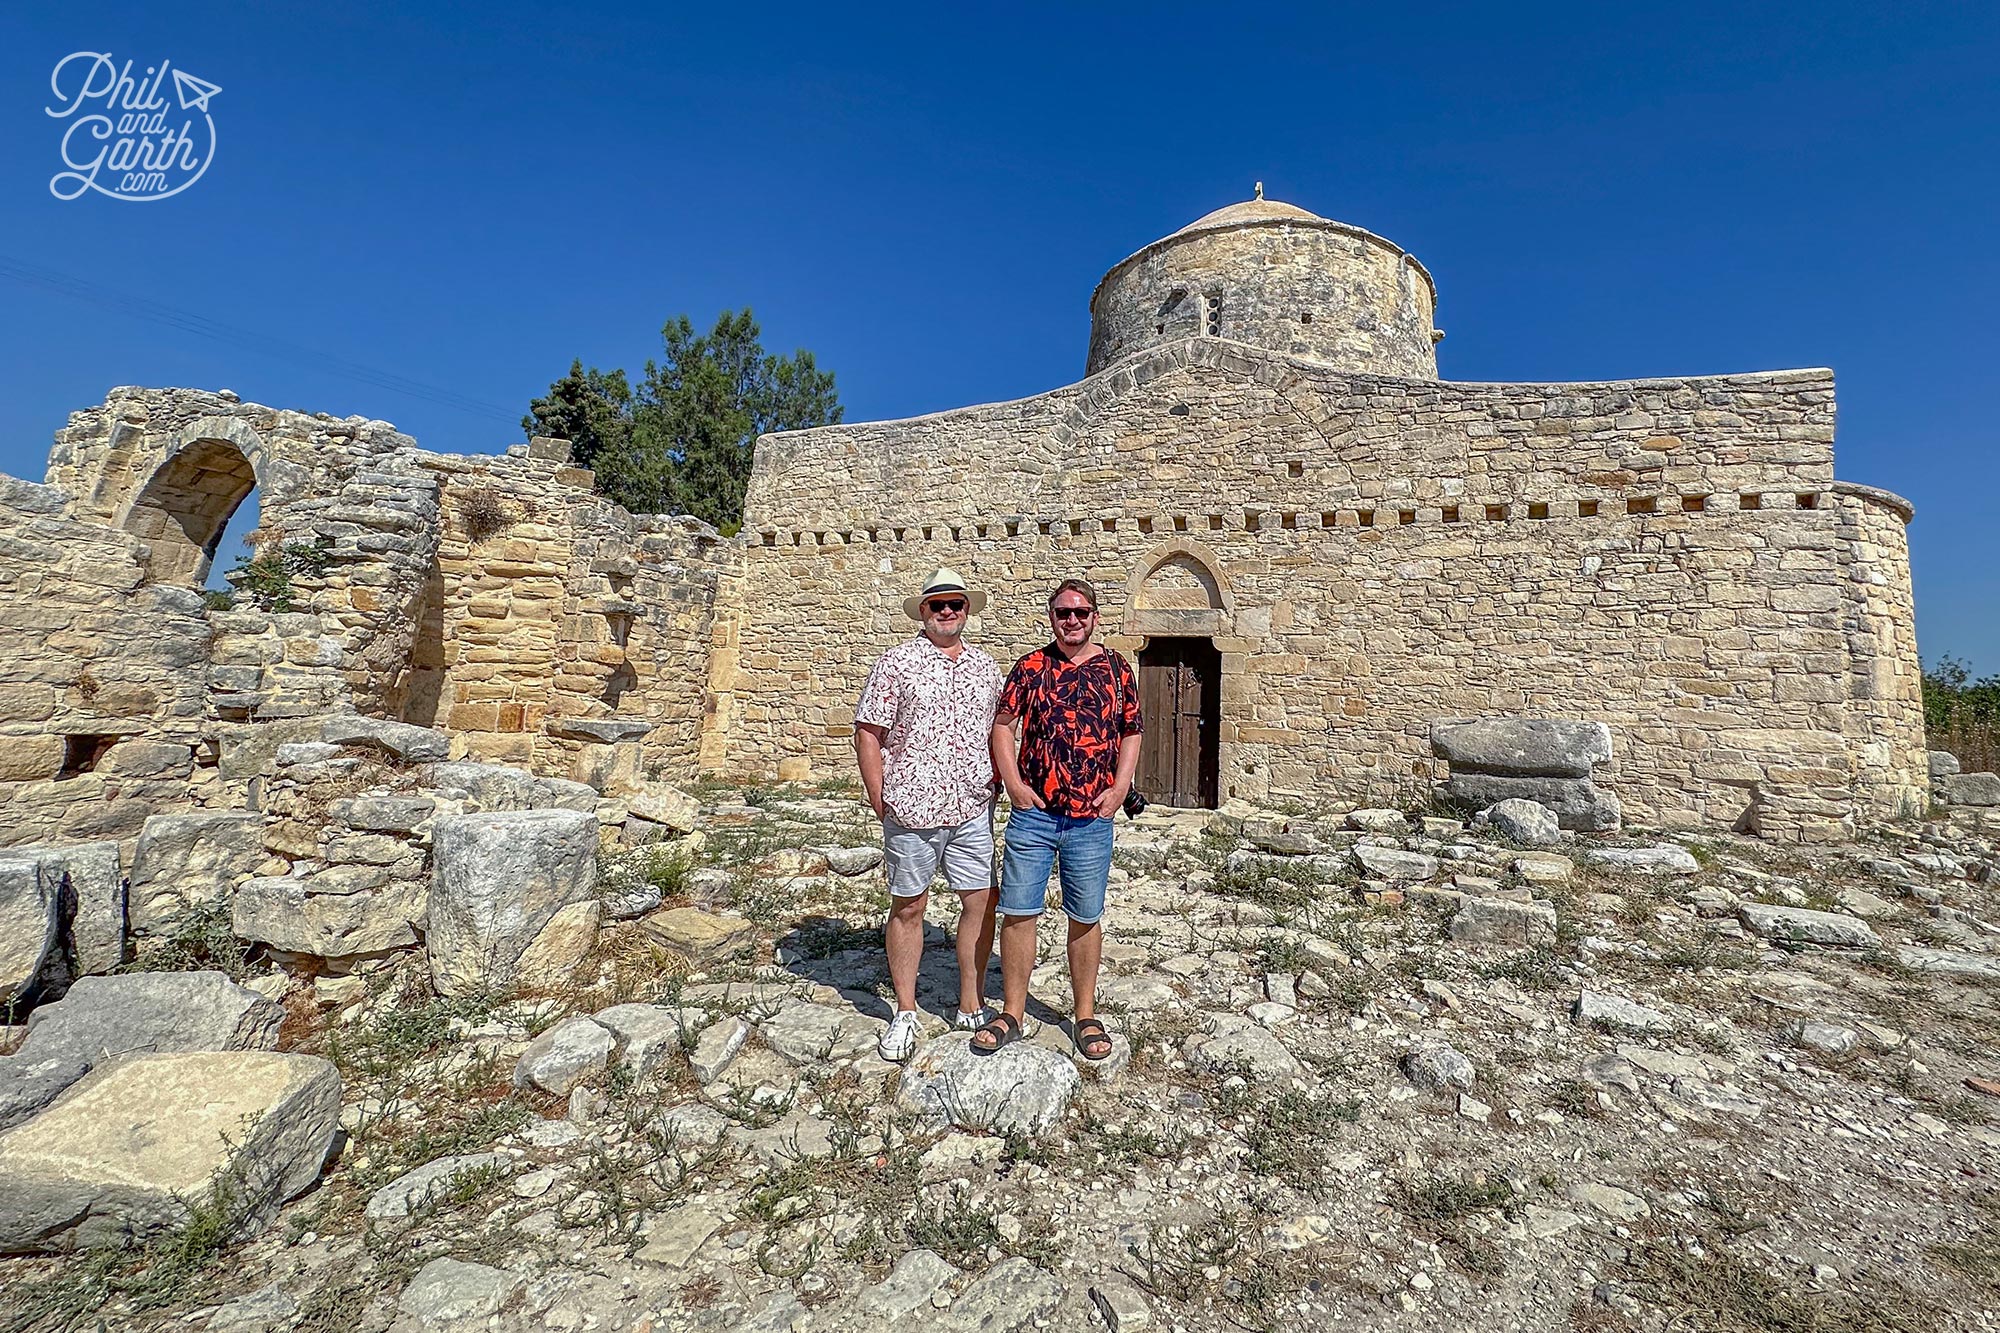 Phil and Garth at the Monastery of Timios Stavros